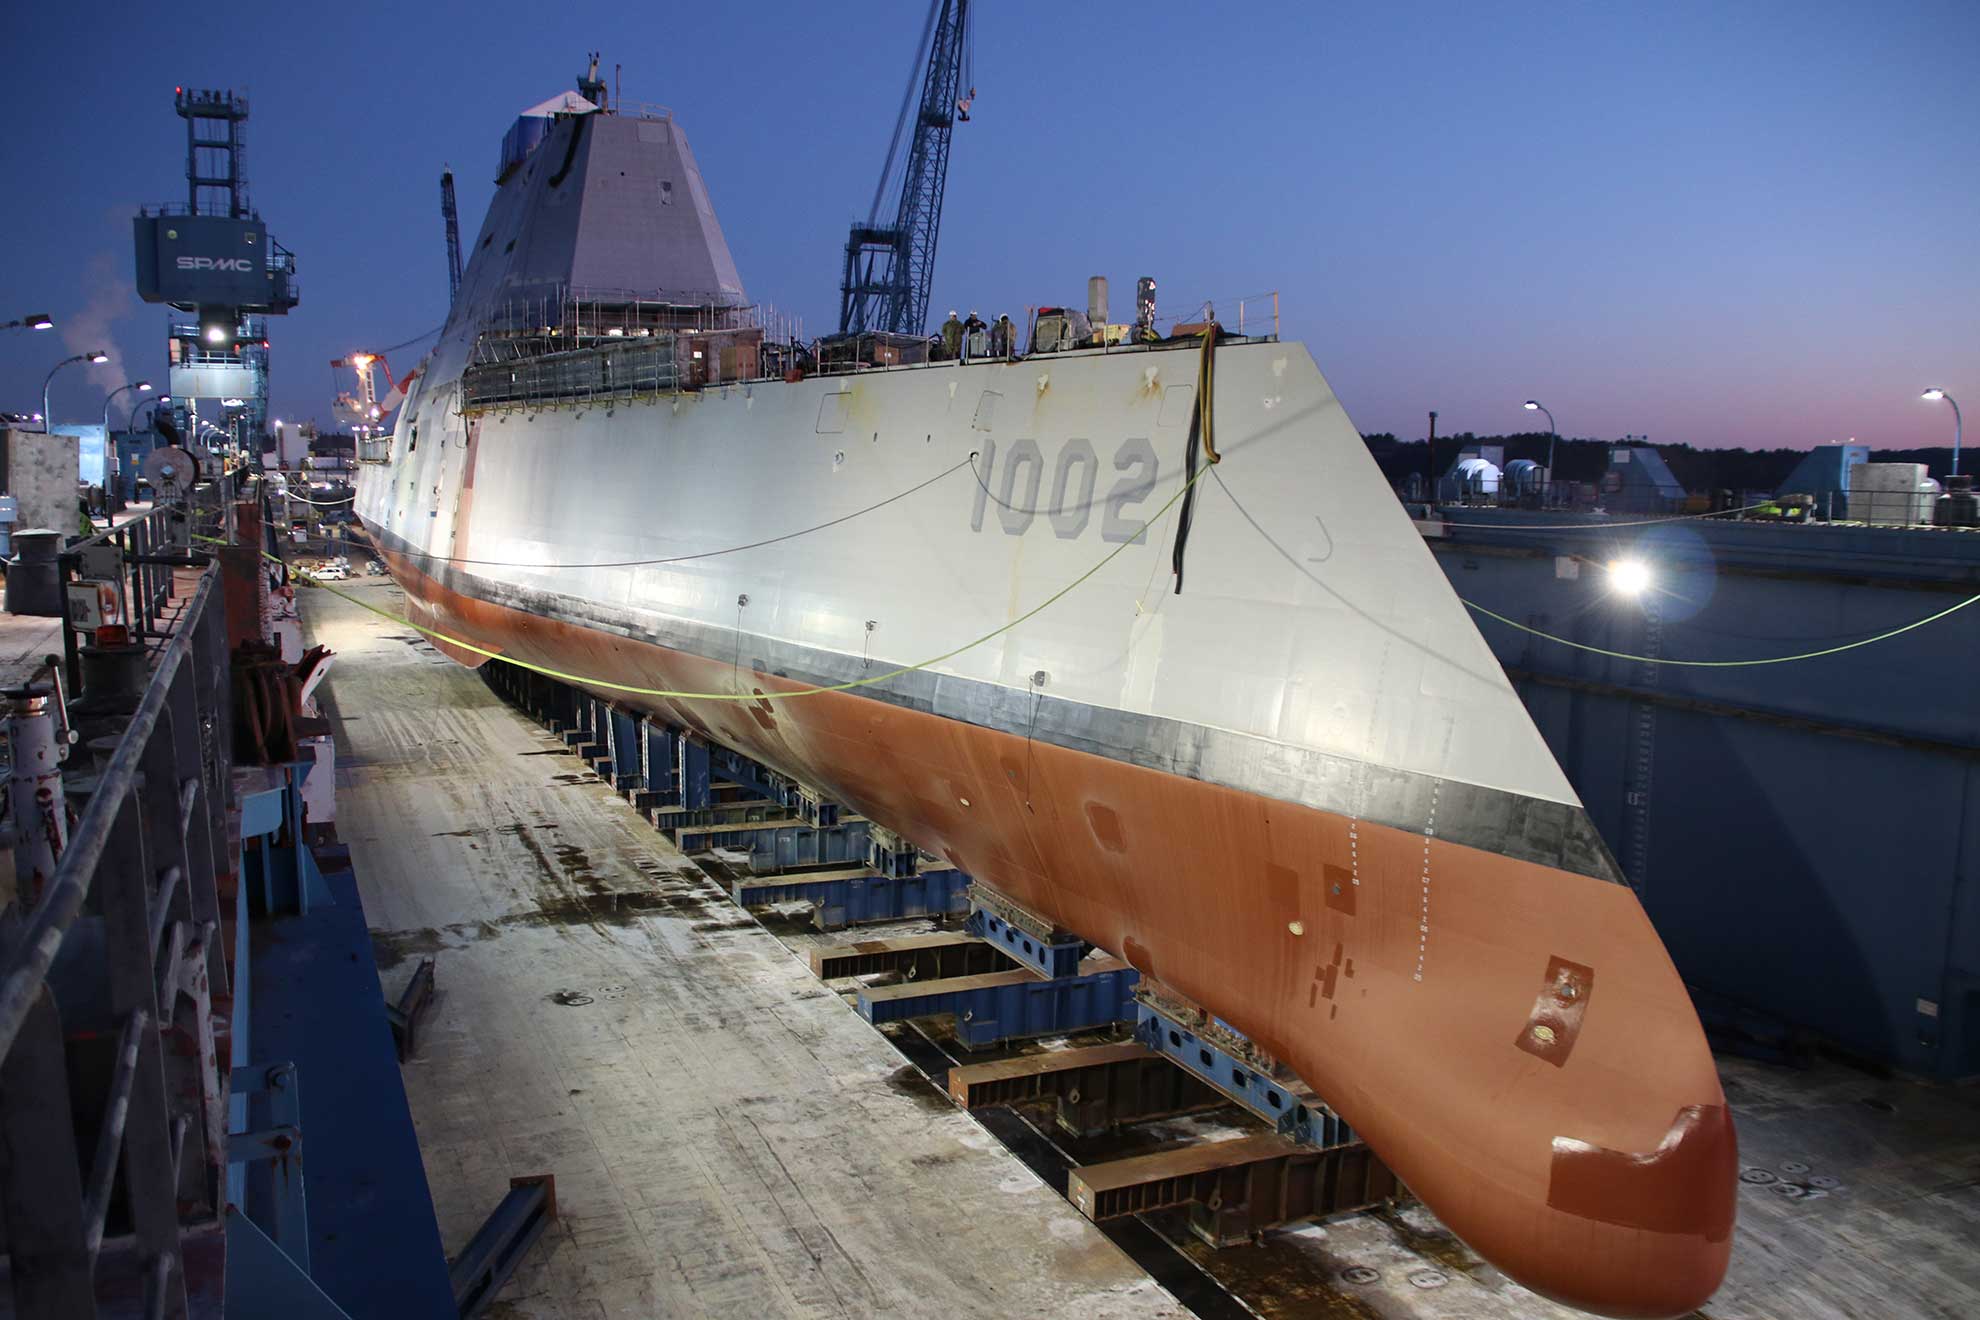 Bath, Maine (Dec. 9, 2018) Following a multi-day process that includes moving the ship from the land level facility to the dry dock, the future USS Lyndon B. Johnson (DDG 1002) is made ready before flooding of the dry dock at General Dynamic-Bath Iron Works shipyard, and subsequent launching of the third Zumwalt-class destroyer -- U.S. Navy photo courtesy of General Dynamics-Bath Iron Works. -